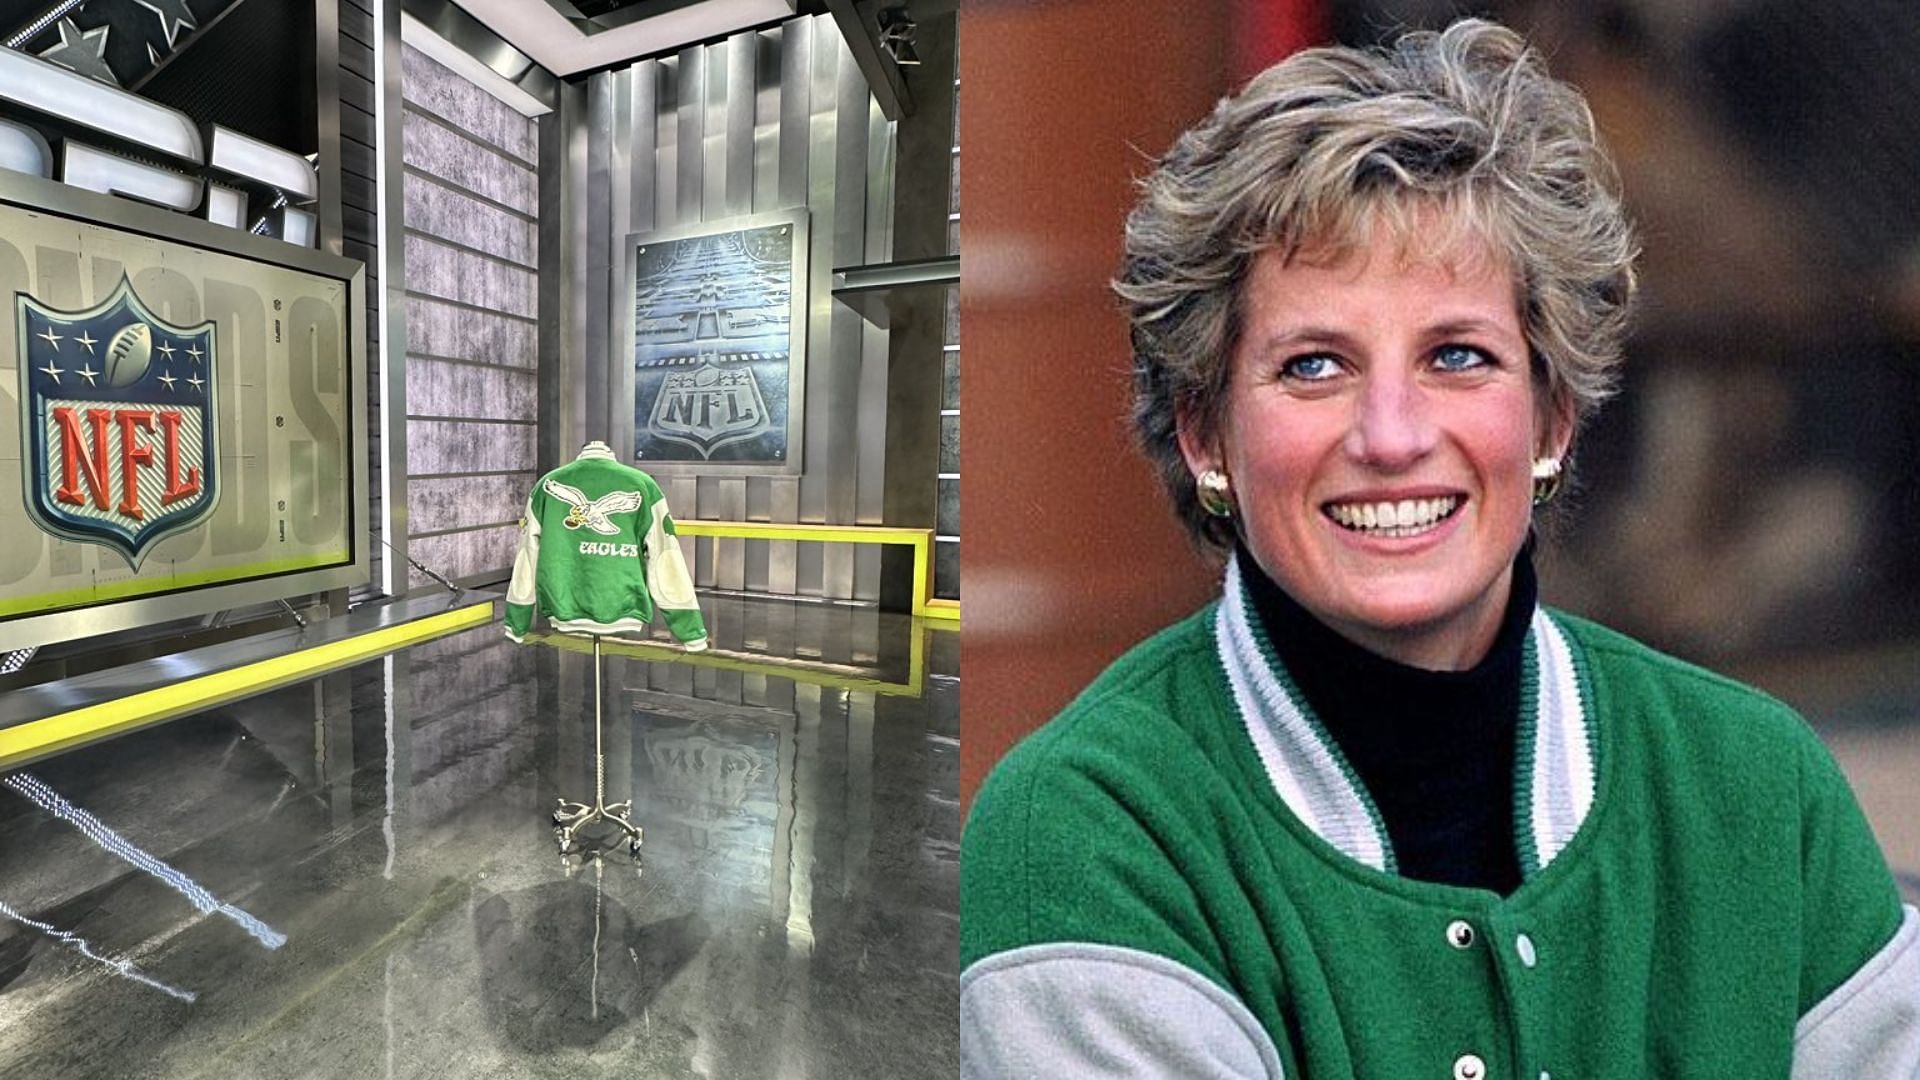 Princess Diana's Eagles jacket goes viral ahead of franchise's